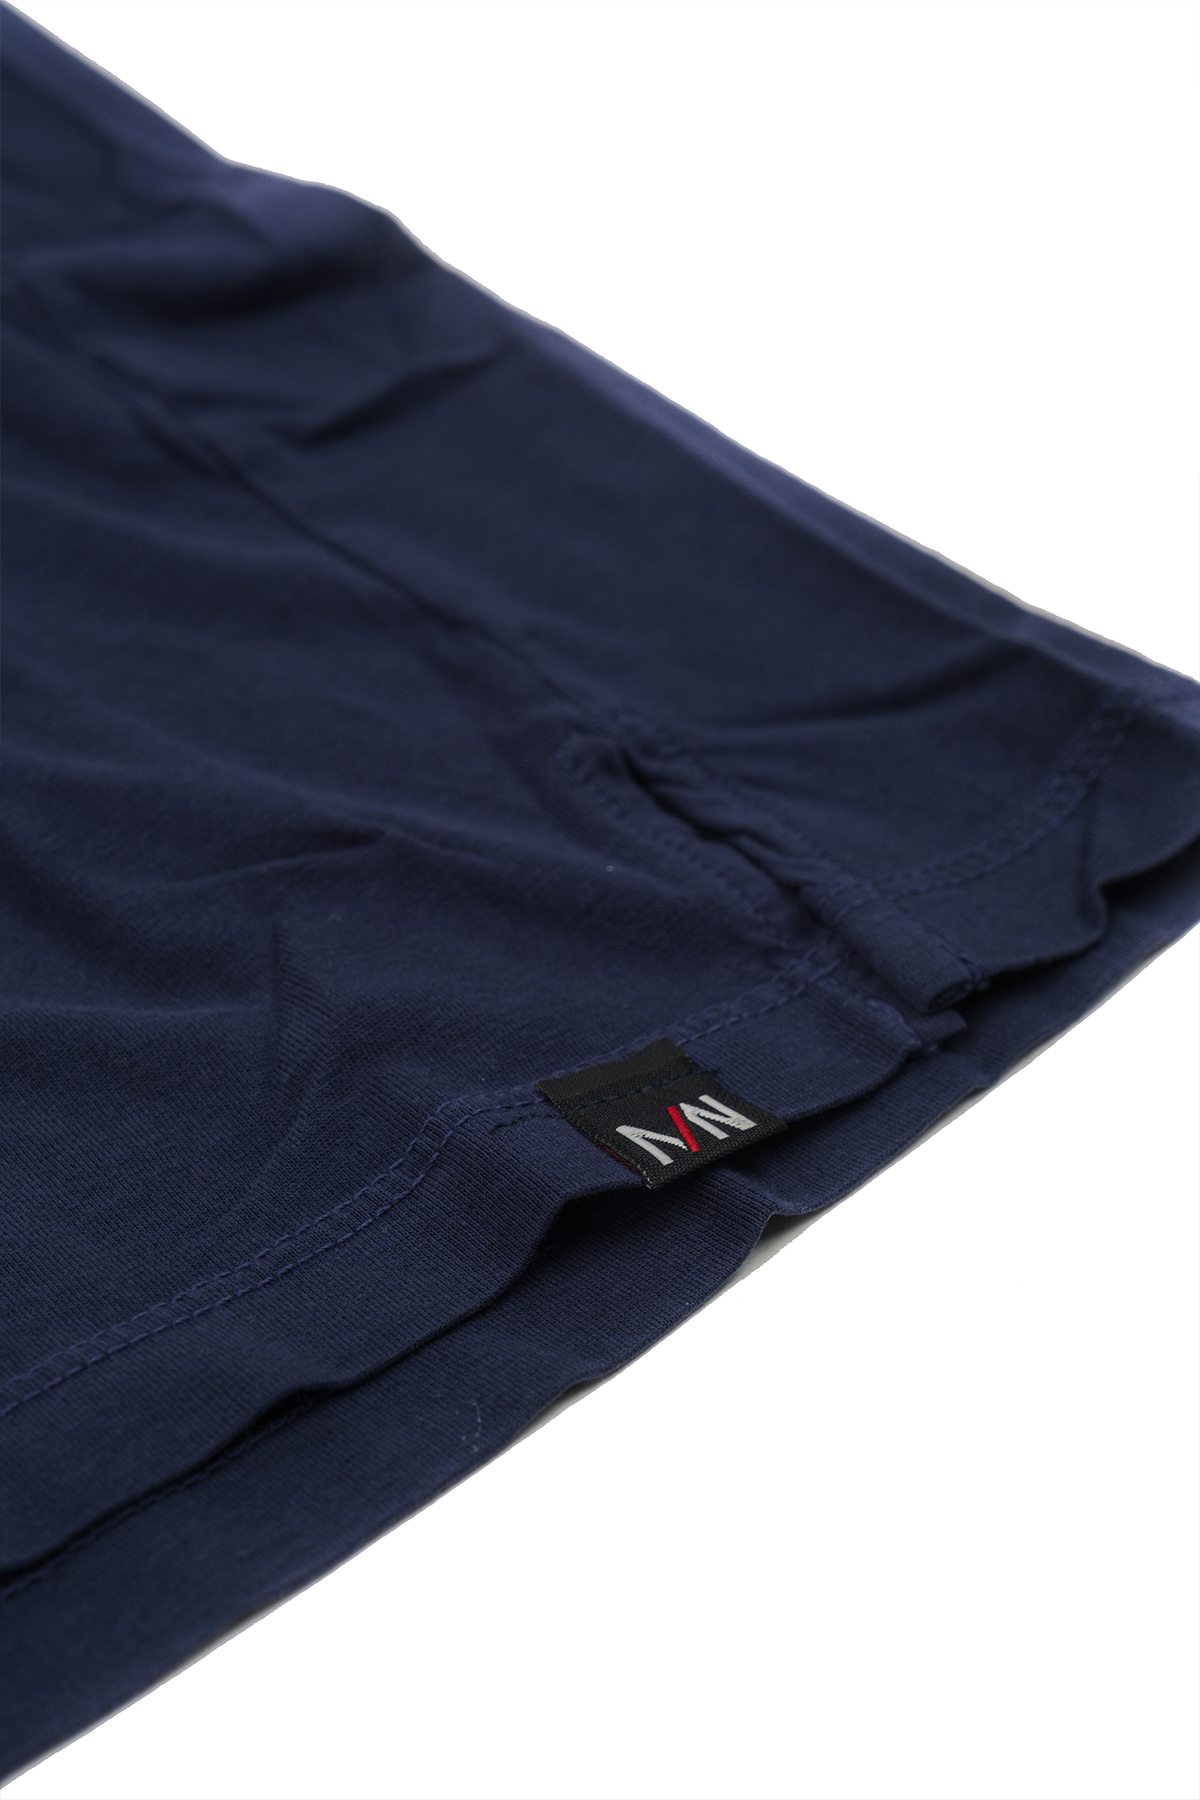 Close up shot of tag on Navy crew neck t-shirt folded on a white background.